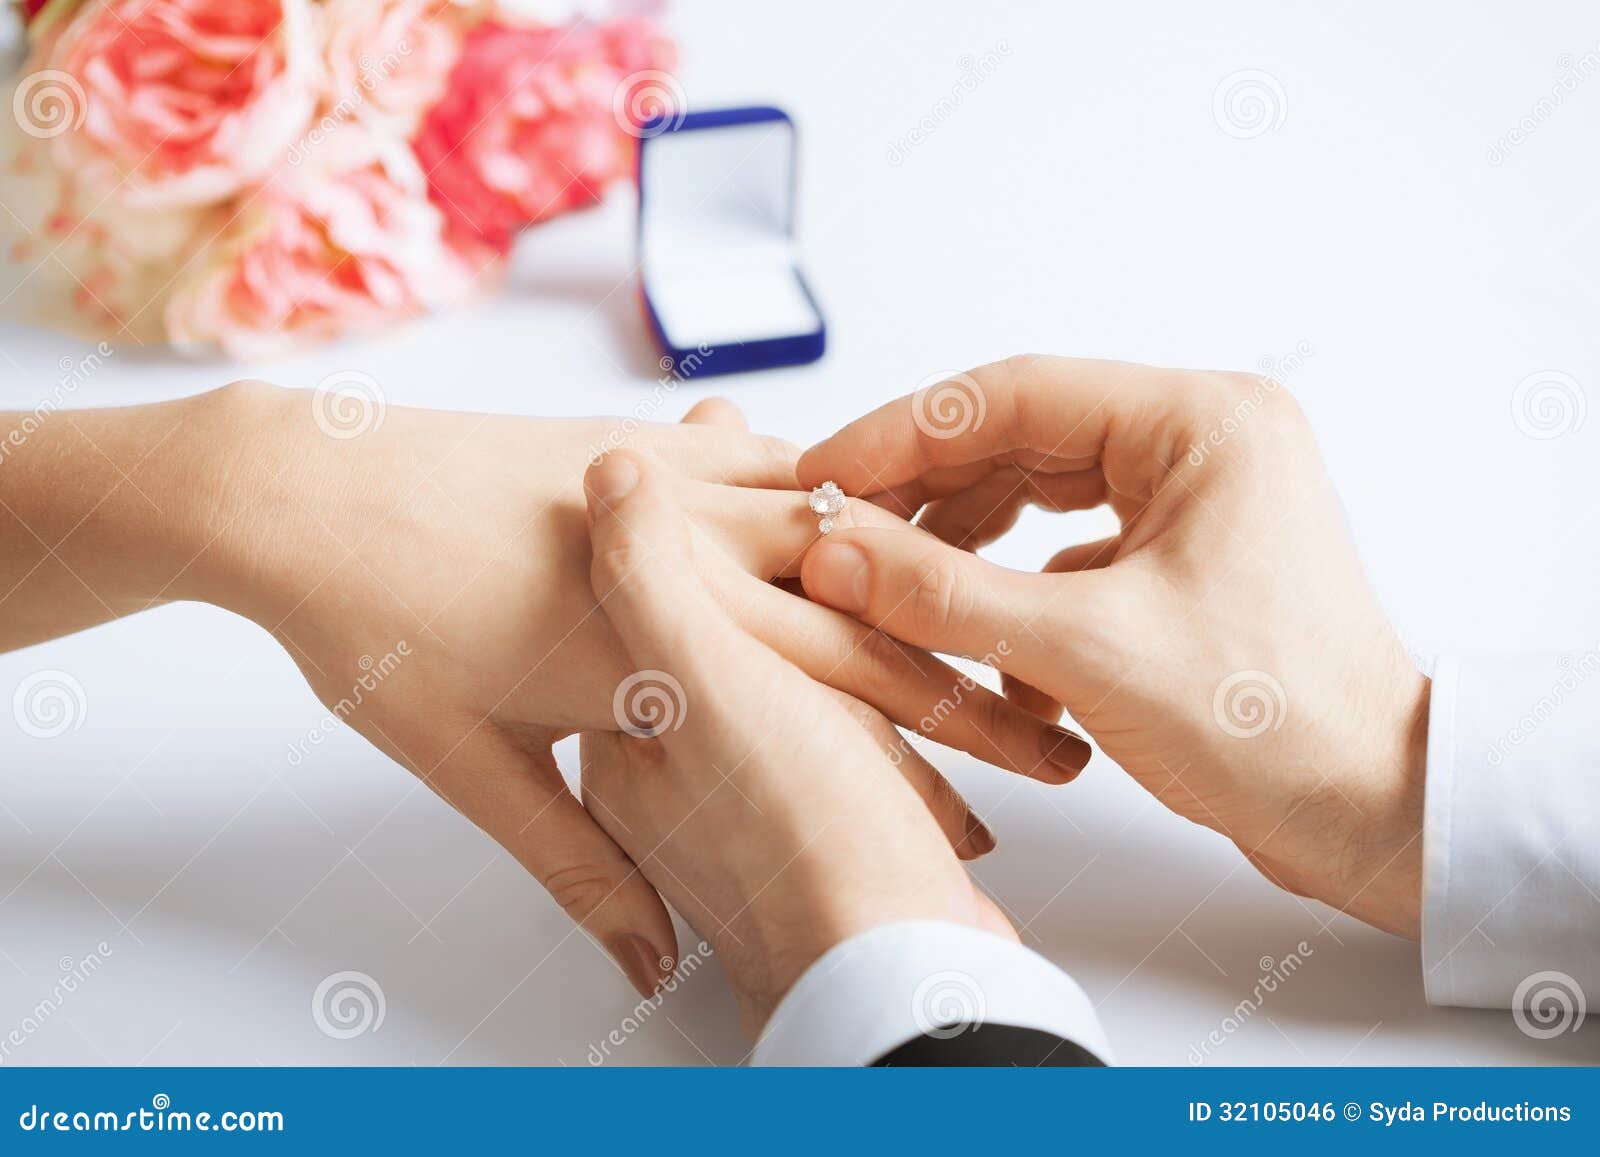 Wedding rings on which hand